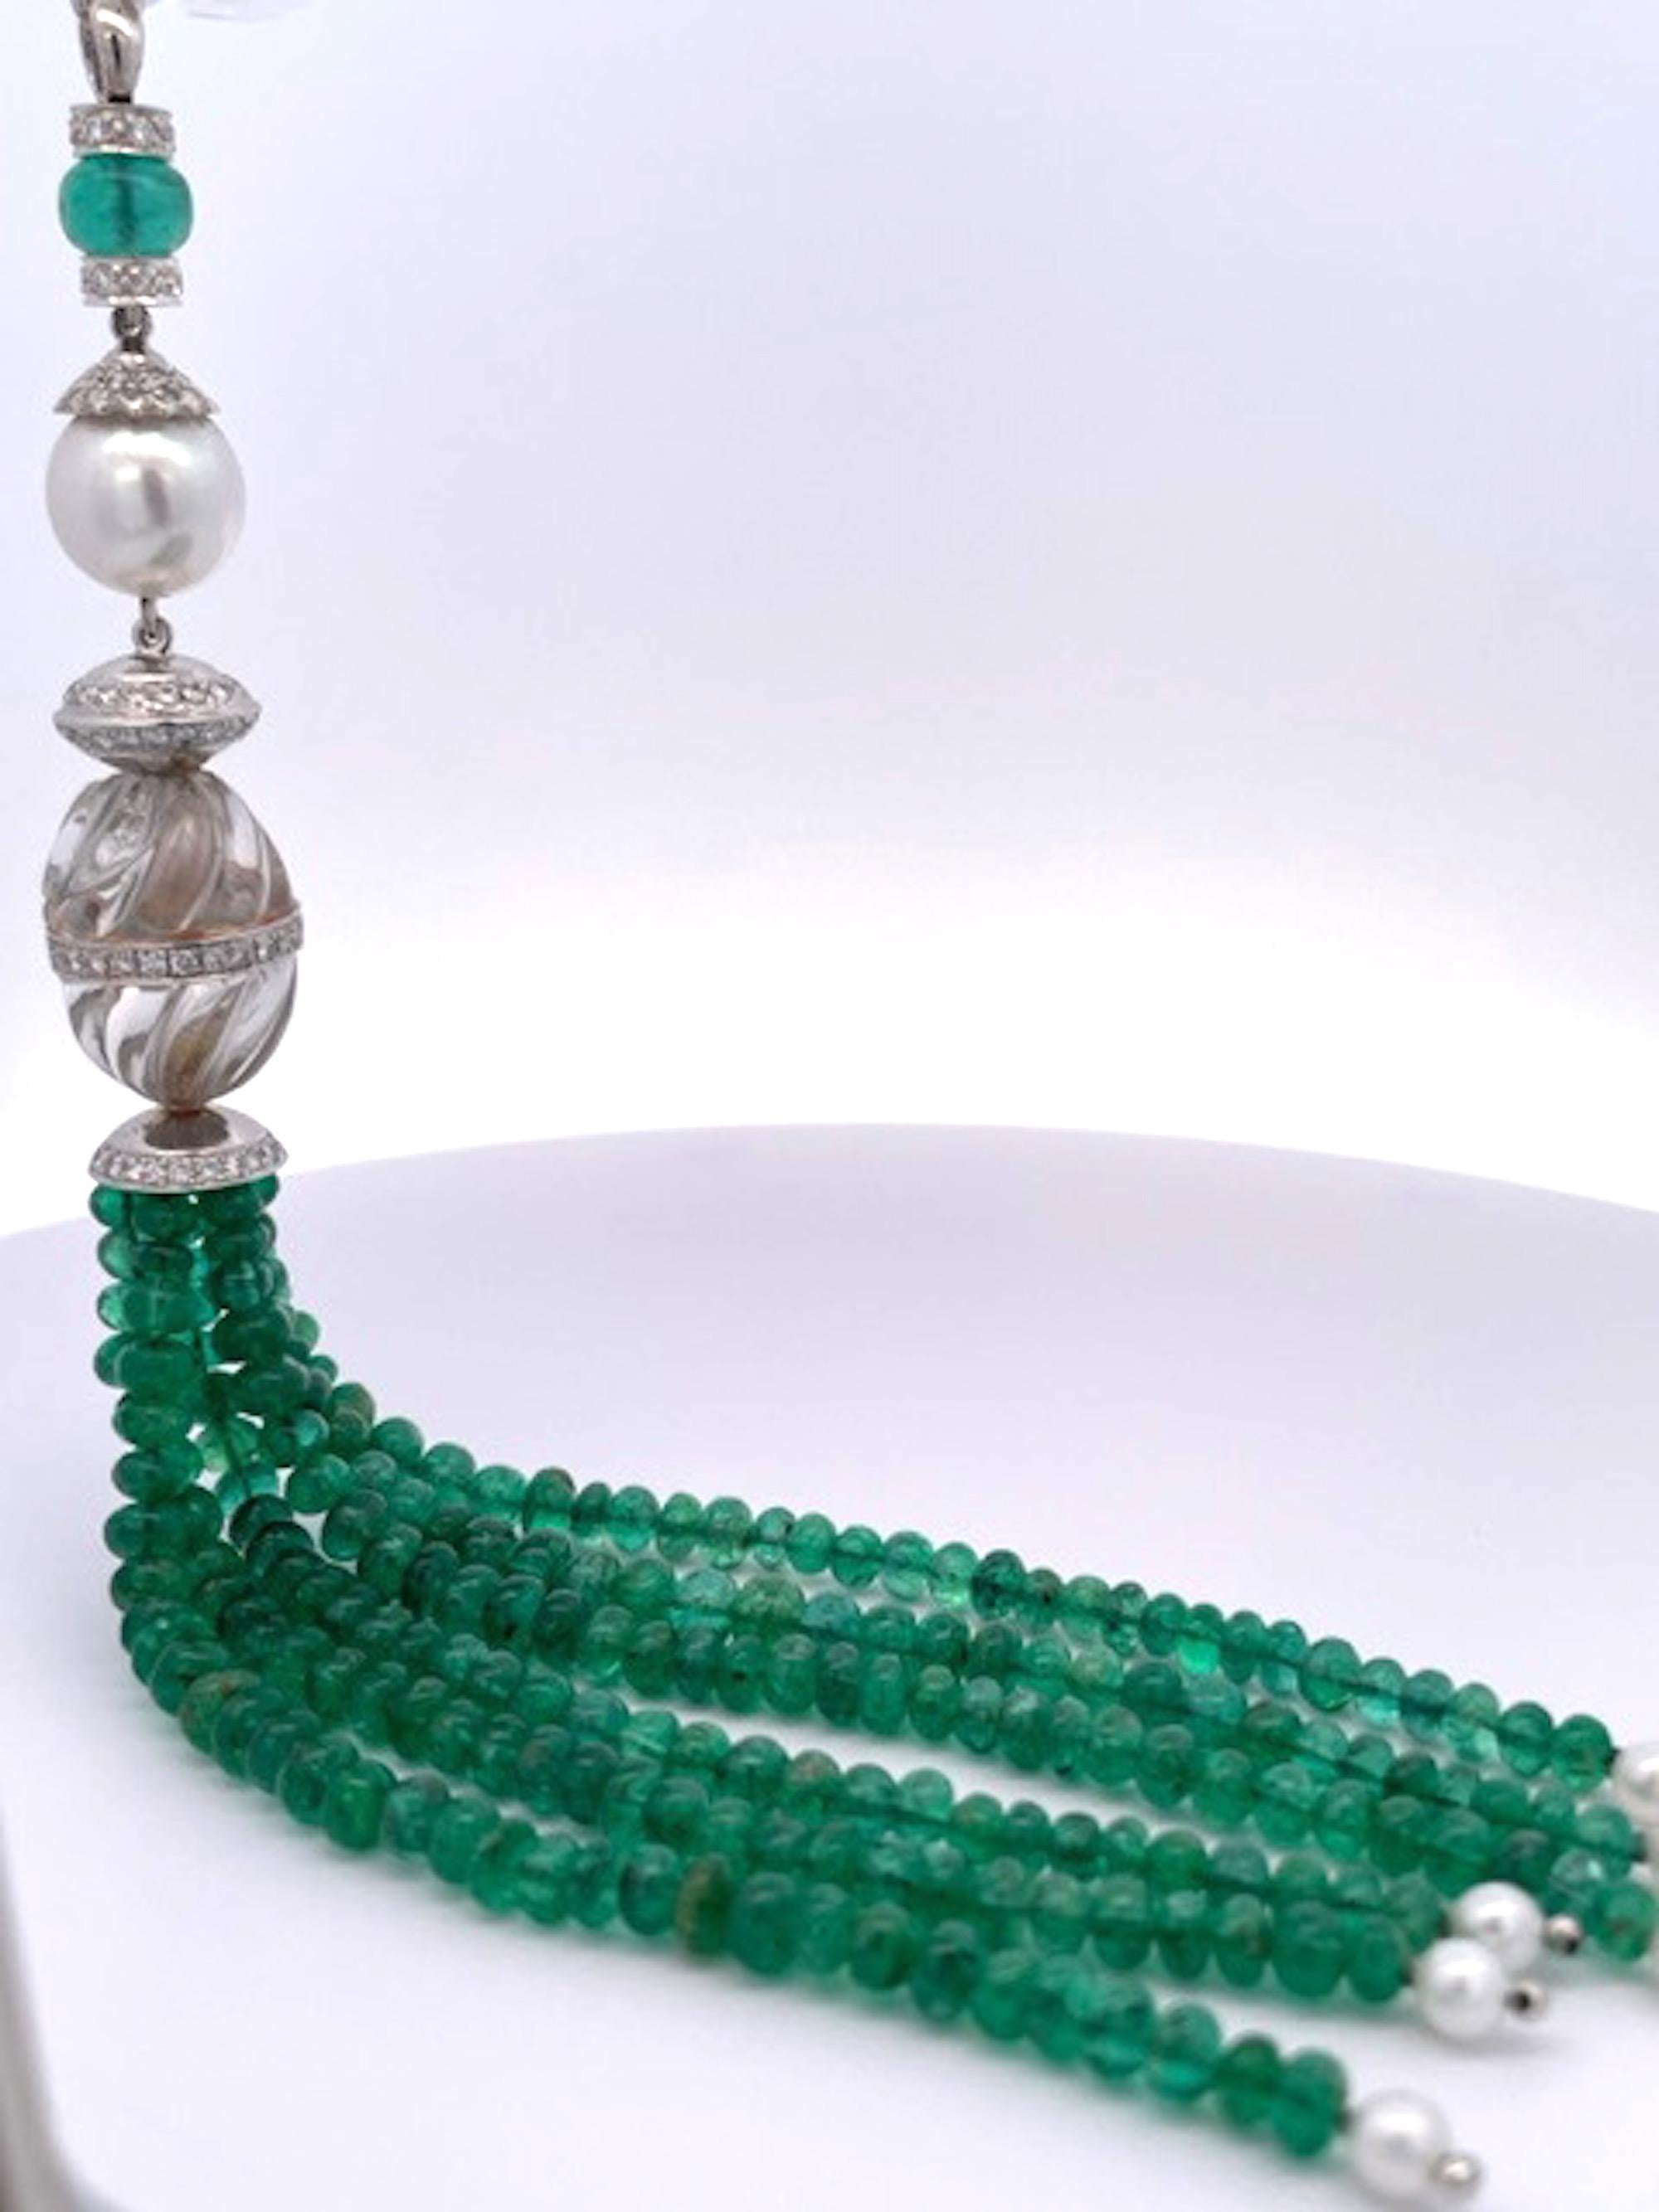 This rock crystal Emerald and Diamond tassel is special and was made for me about 5 years ago.  I wear it on a beaded Emerald Chain.  This necklace enhancer consists of a Large Pearl with a Diamond studded cap, a fluted Rock Crystal with a Diamond